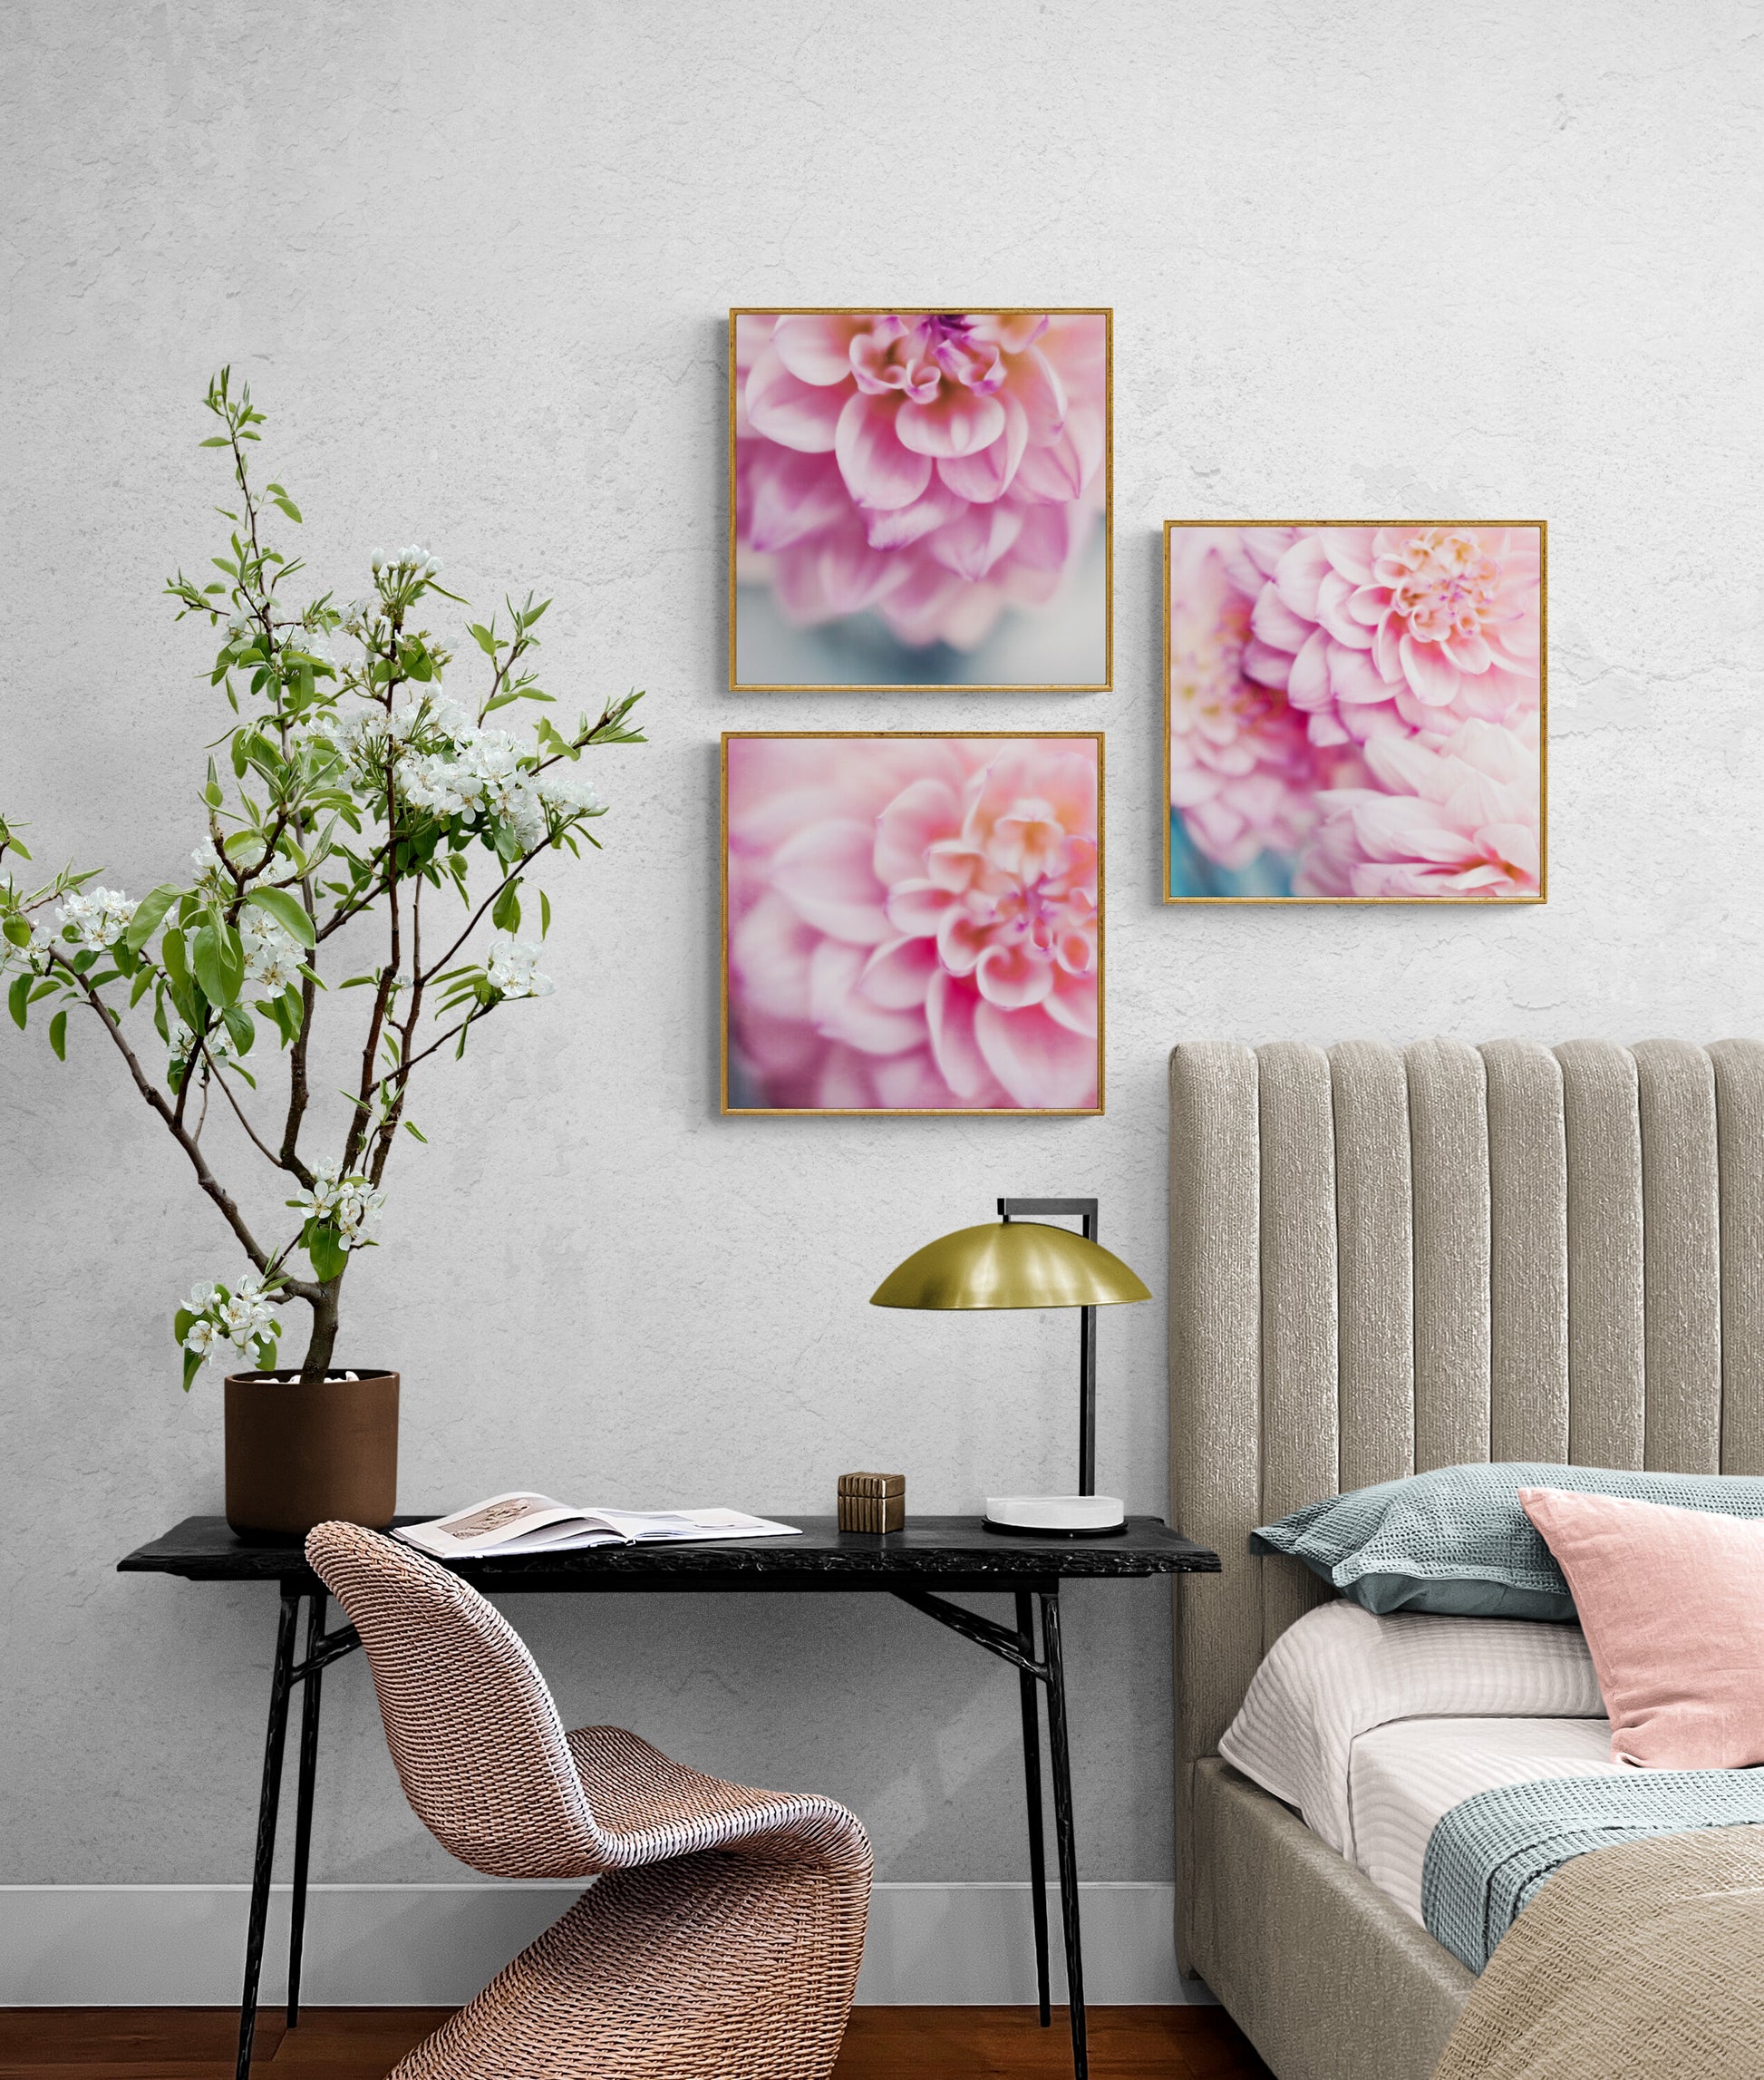 Three Square Dahlia Wall Art Photograph in a Bedroom